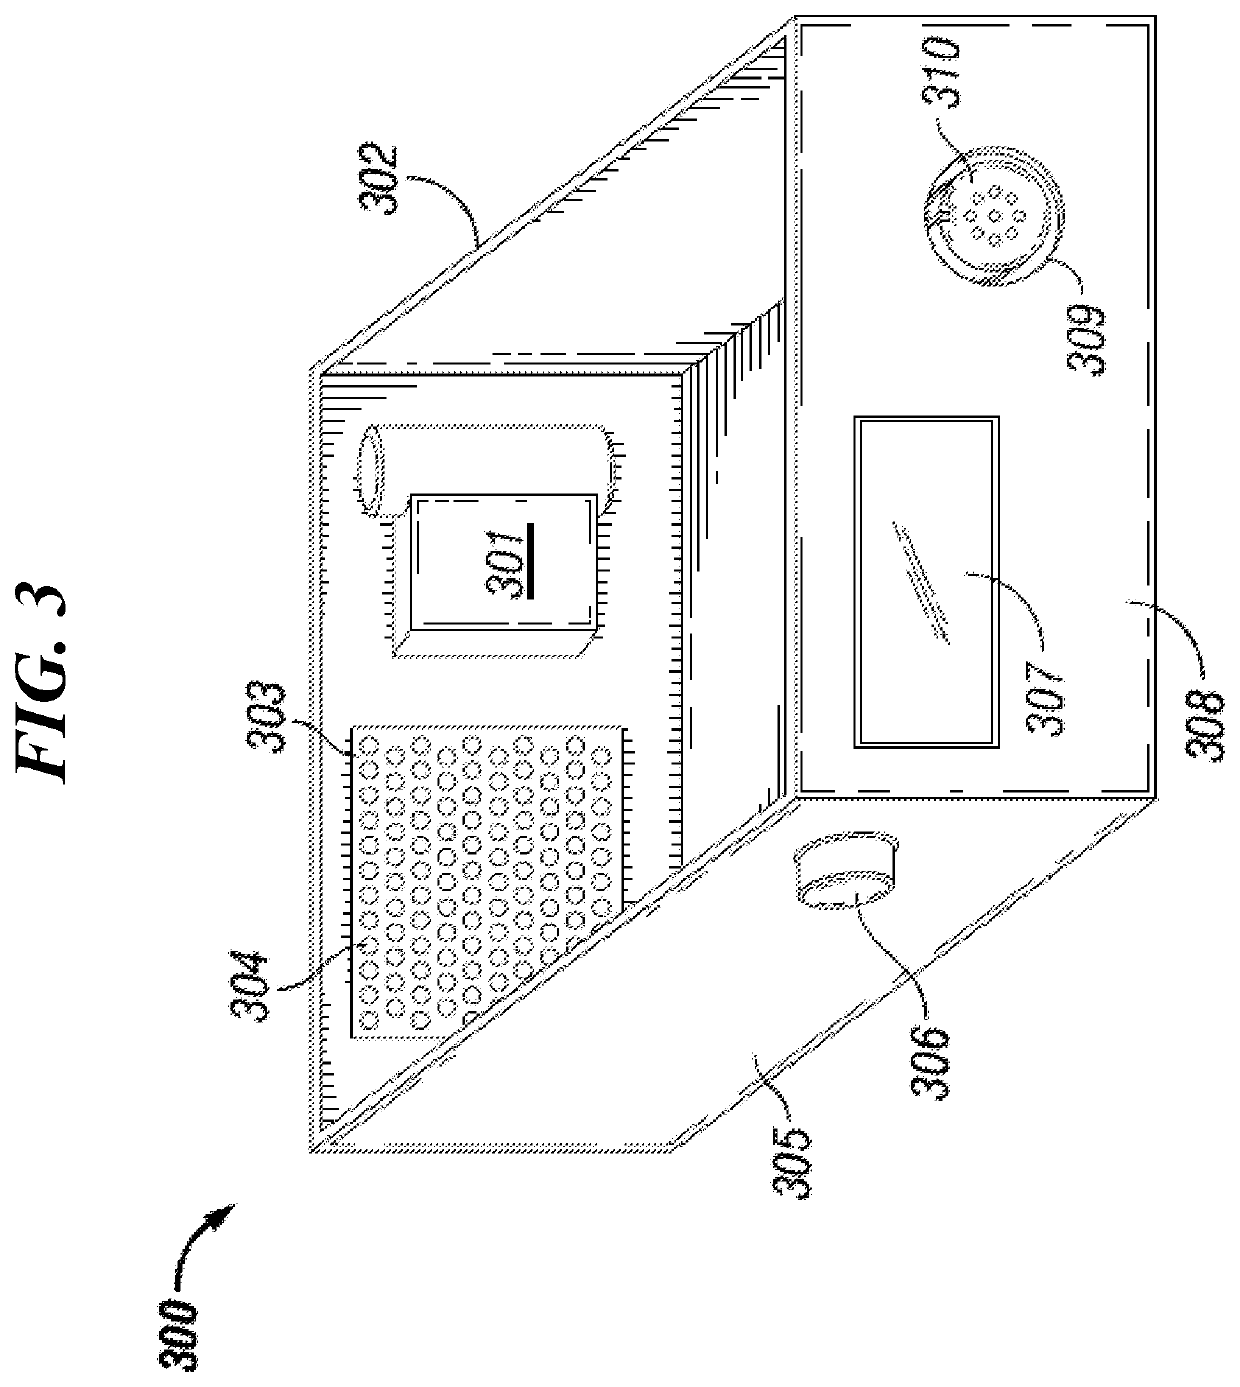 Blood pressure monitoring with zero function system and method